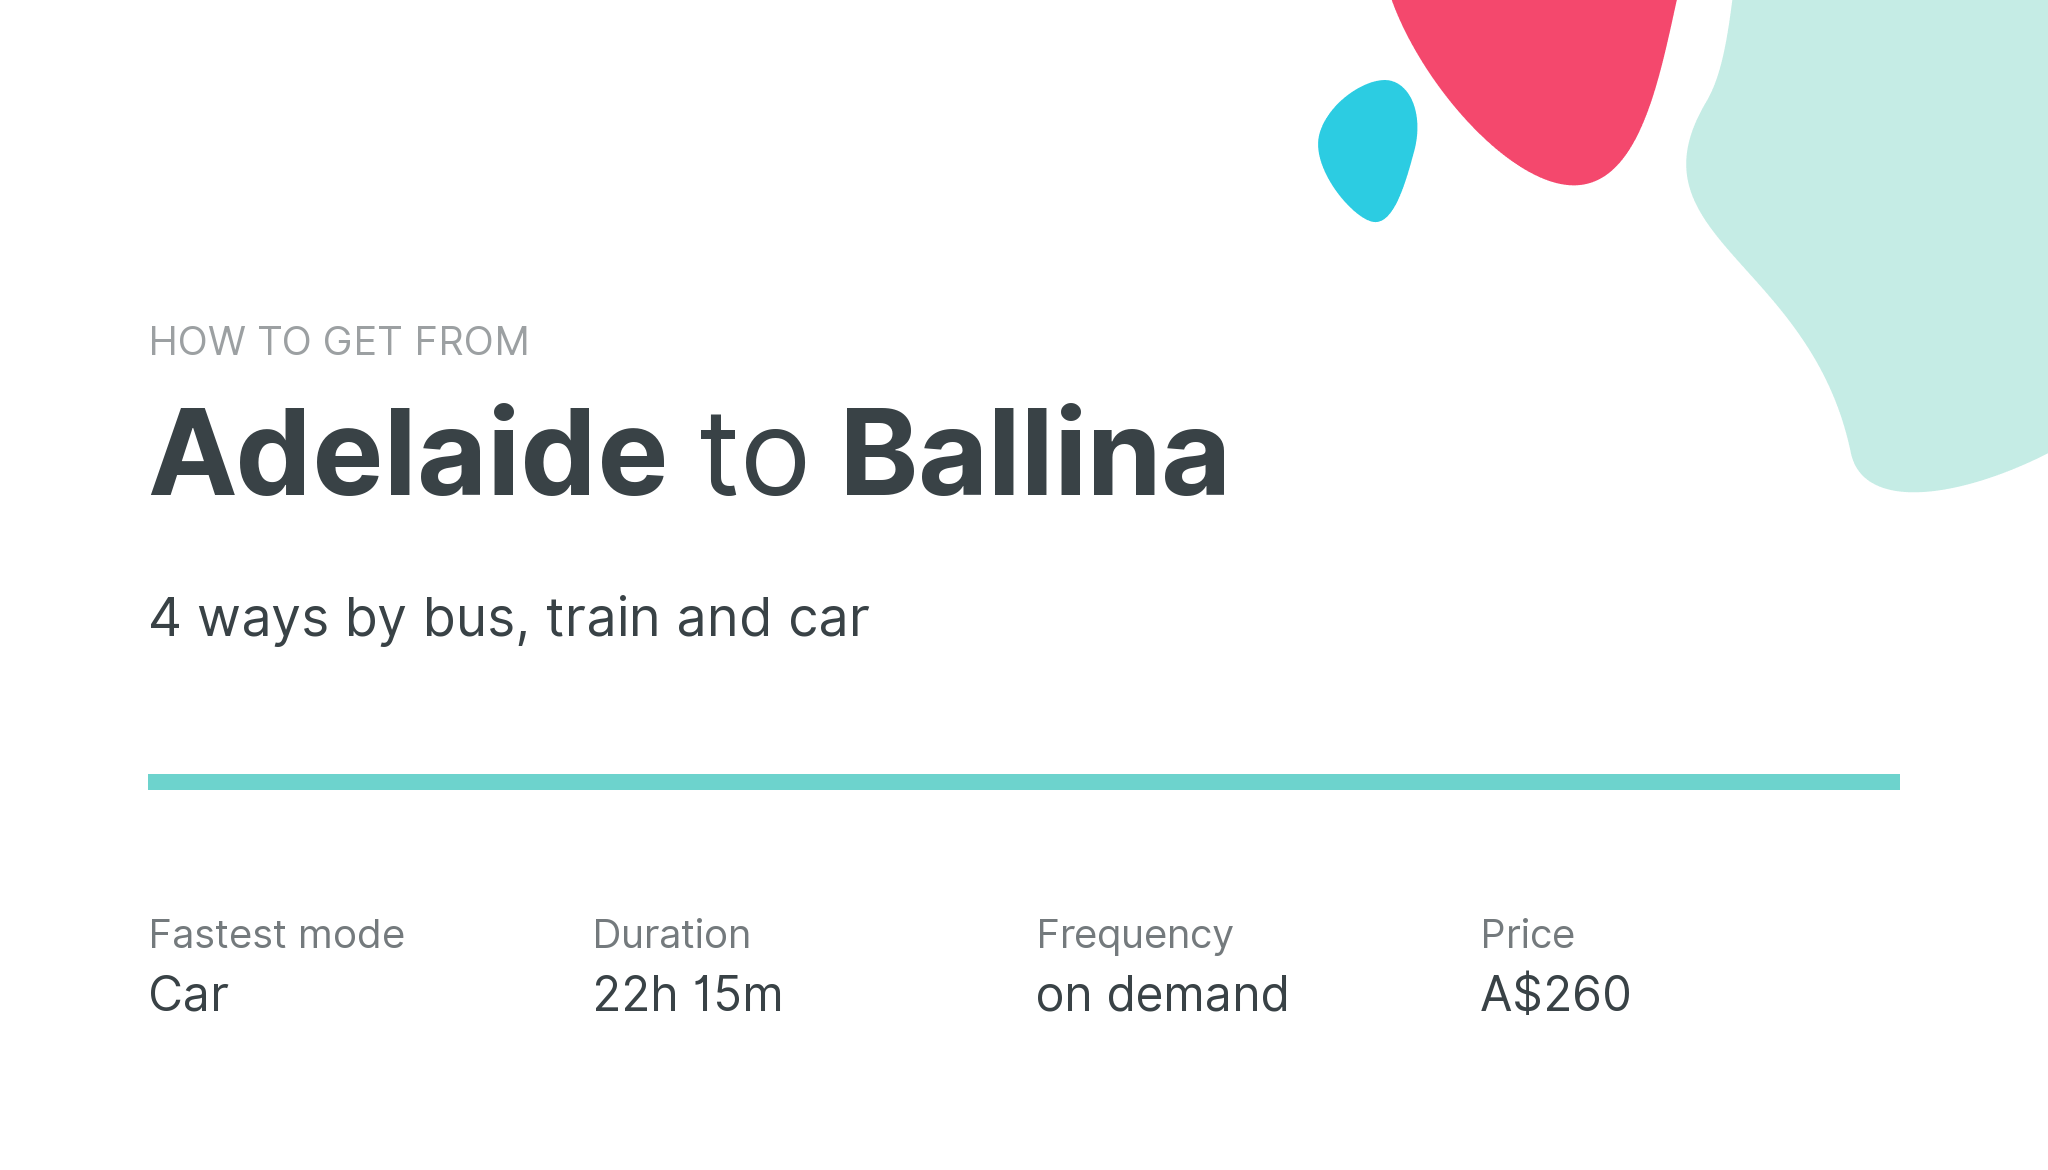 How do I get from Adelaide to Ballina